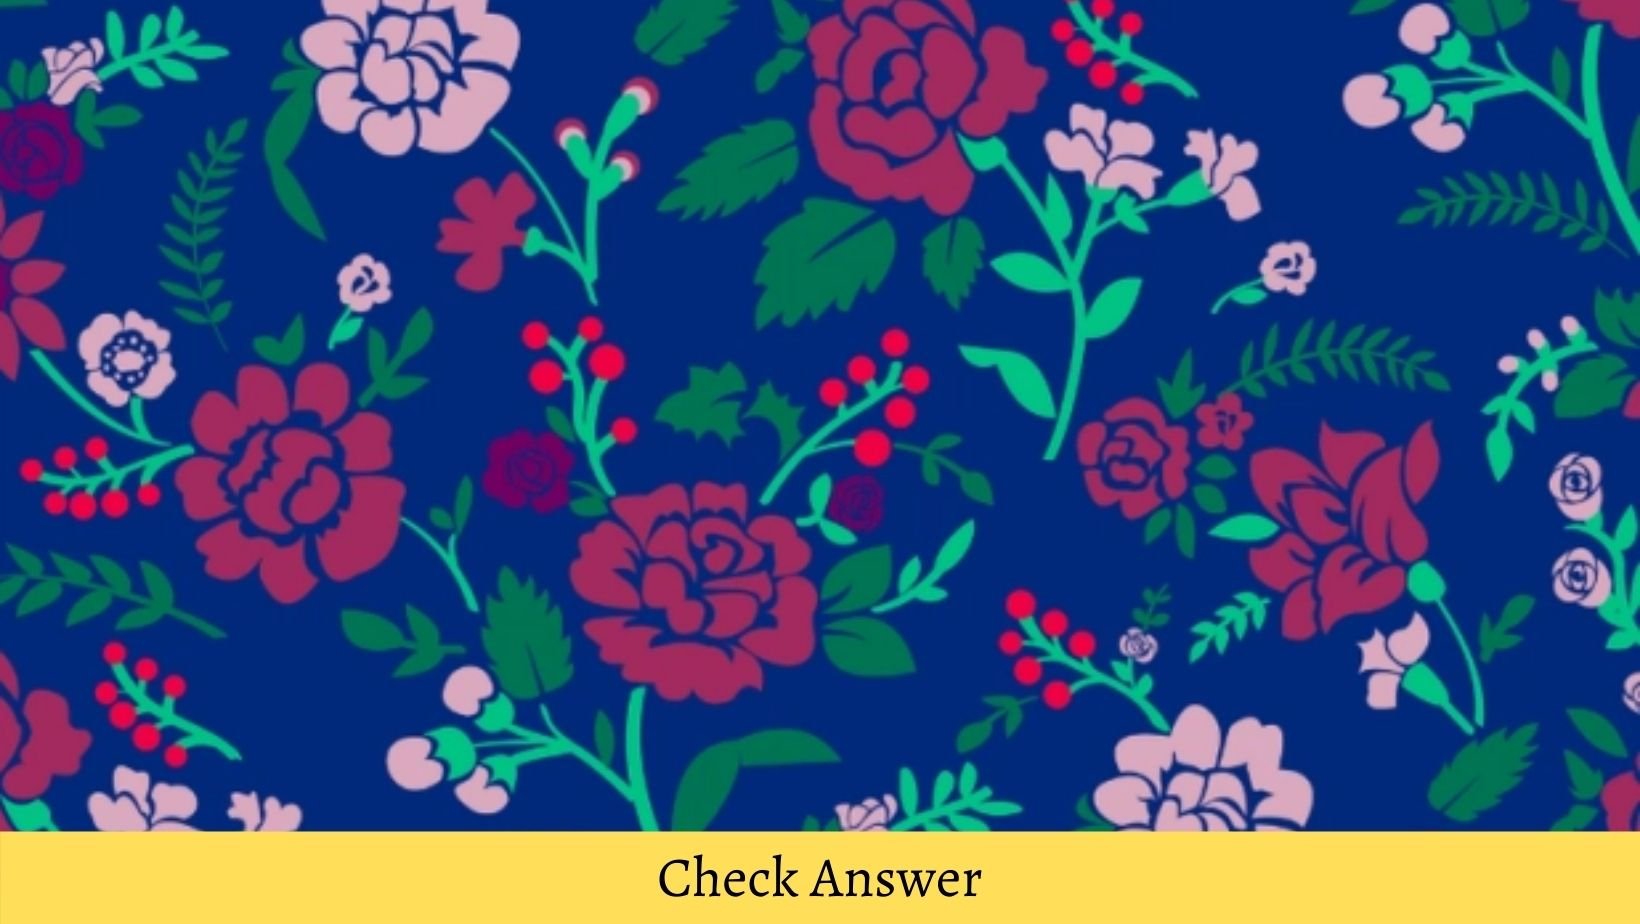 cover 15.jpg?resize=412,232 - Can You Spot The Hidden Crayon In This Floral Image?